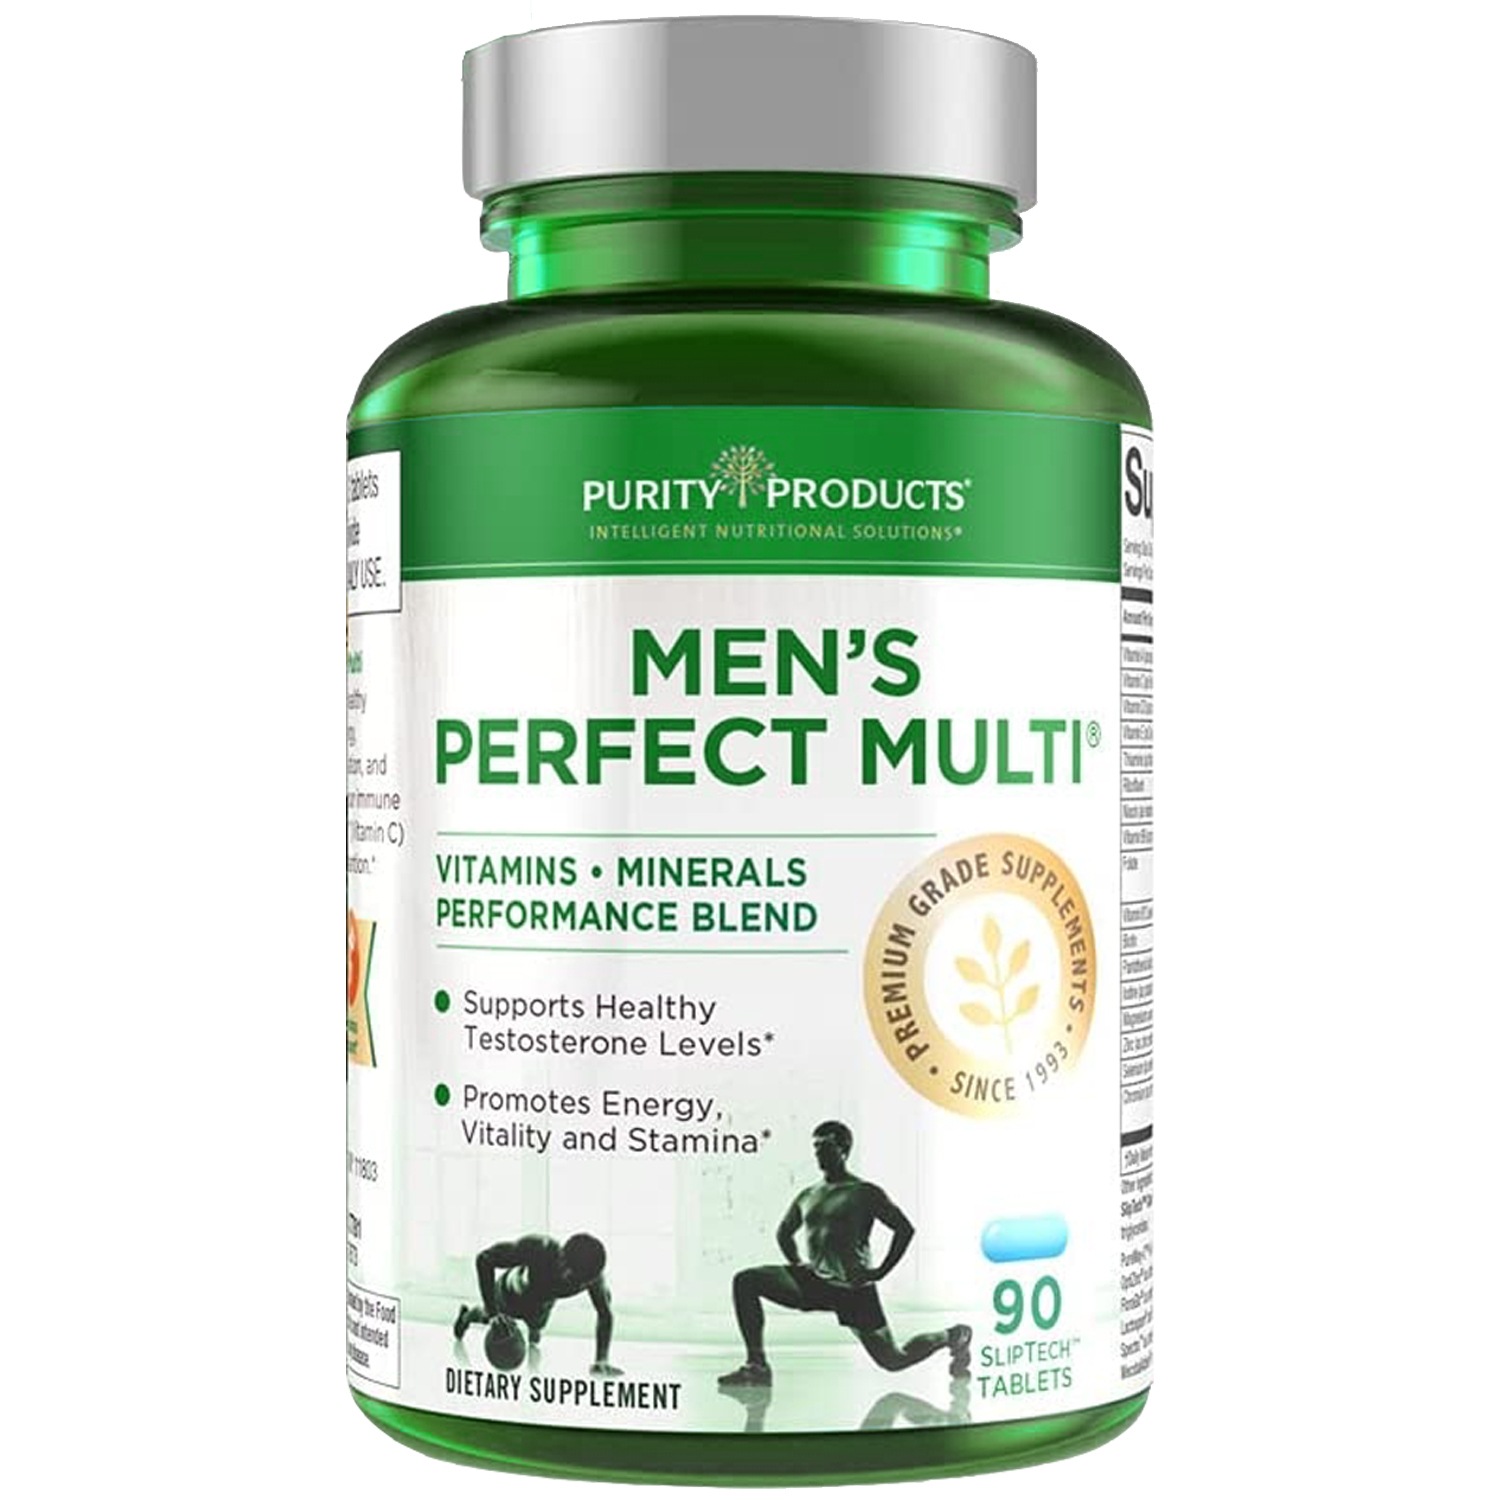 Men's Perfect Multi from Purity Products VitaminsMineralsPhytonutrients 90Tab